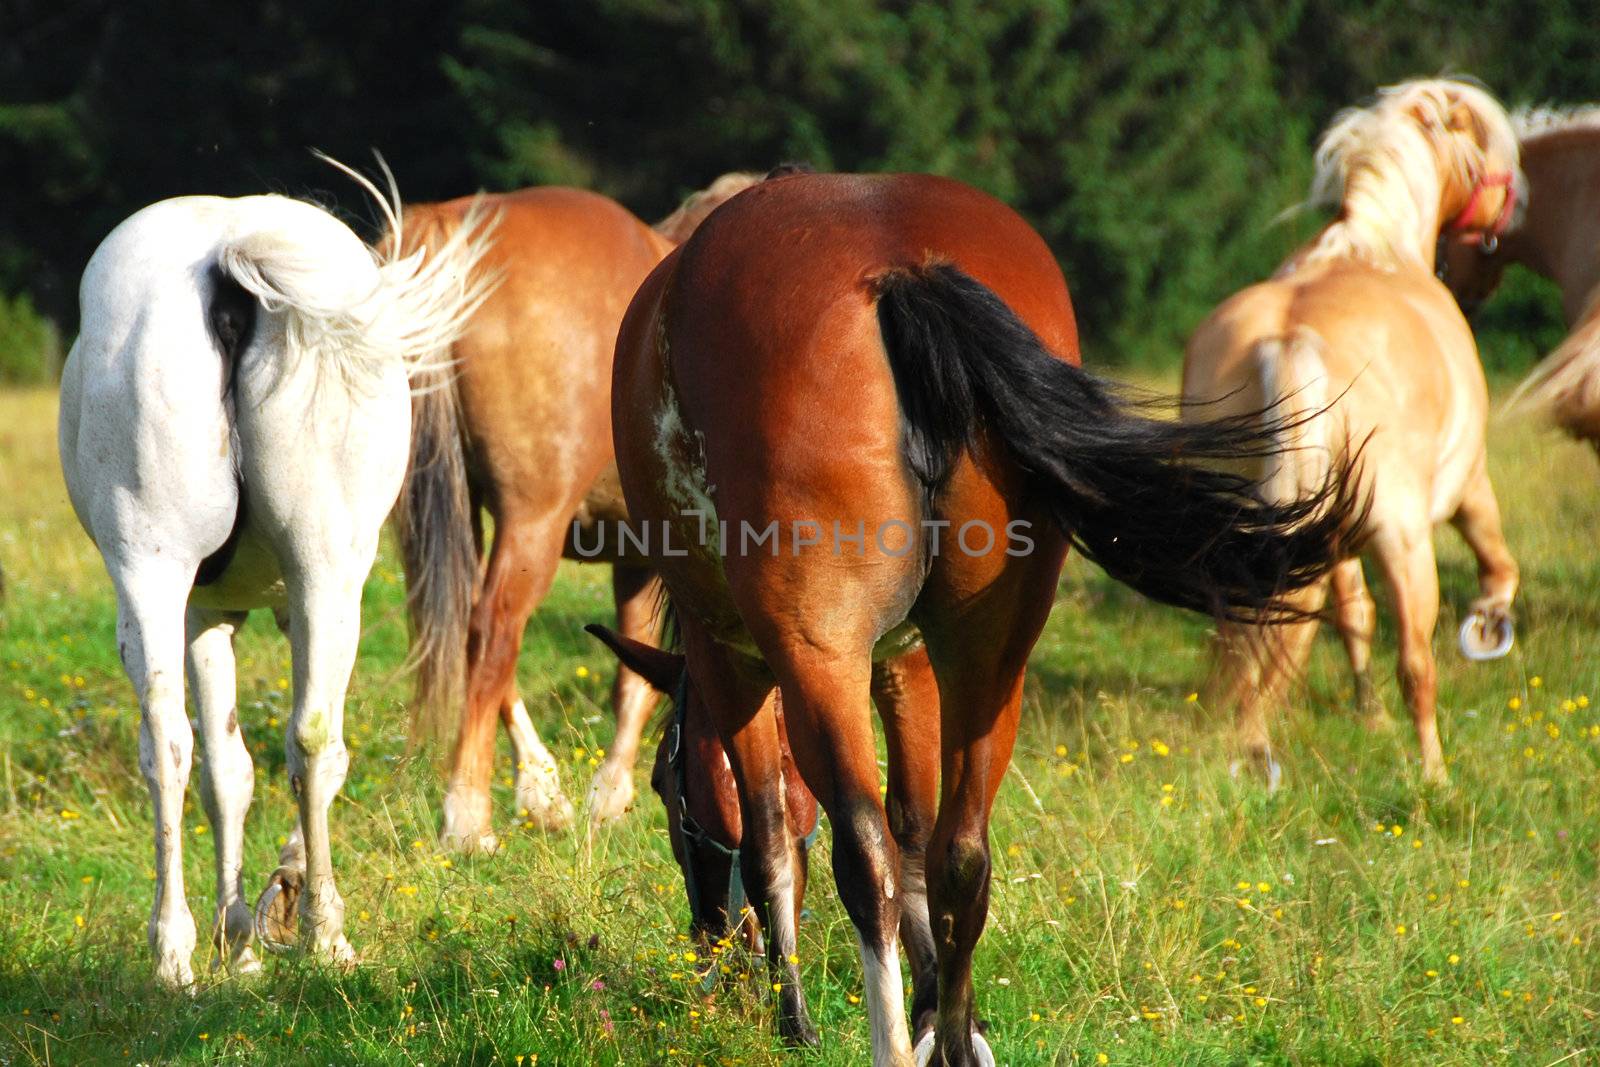 Horses free to run and enjoy in Val Visdende, Italy